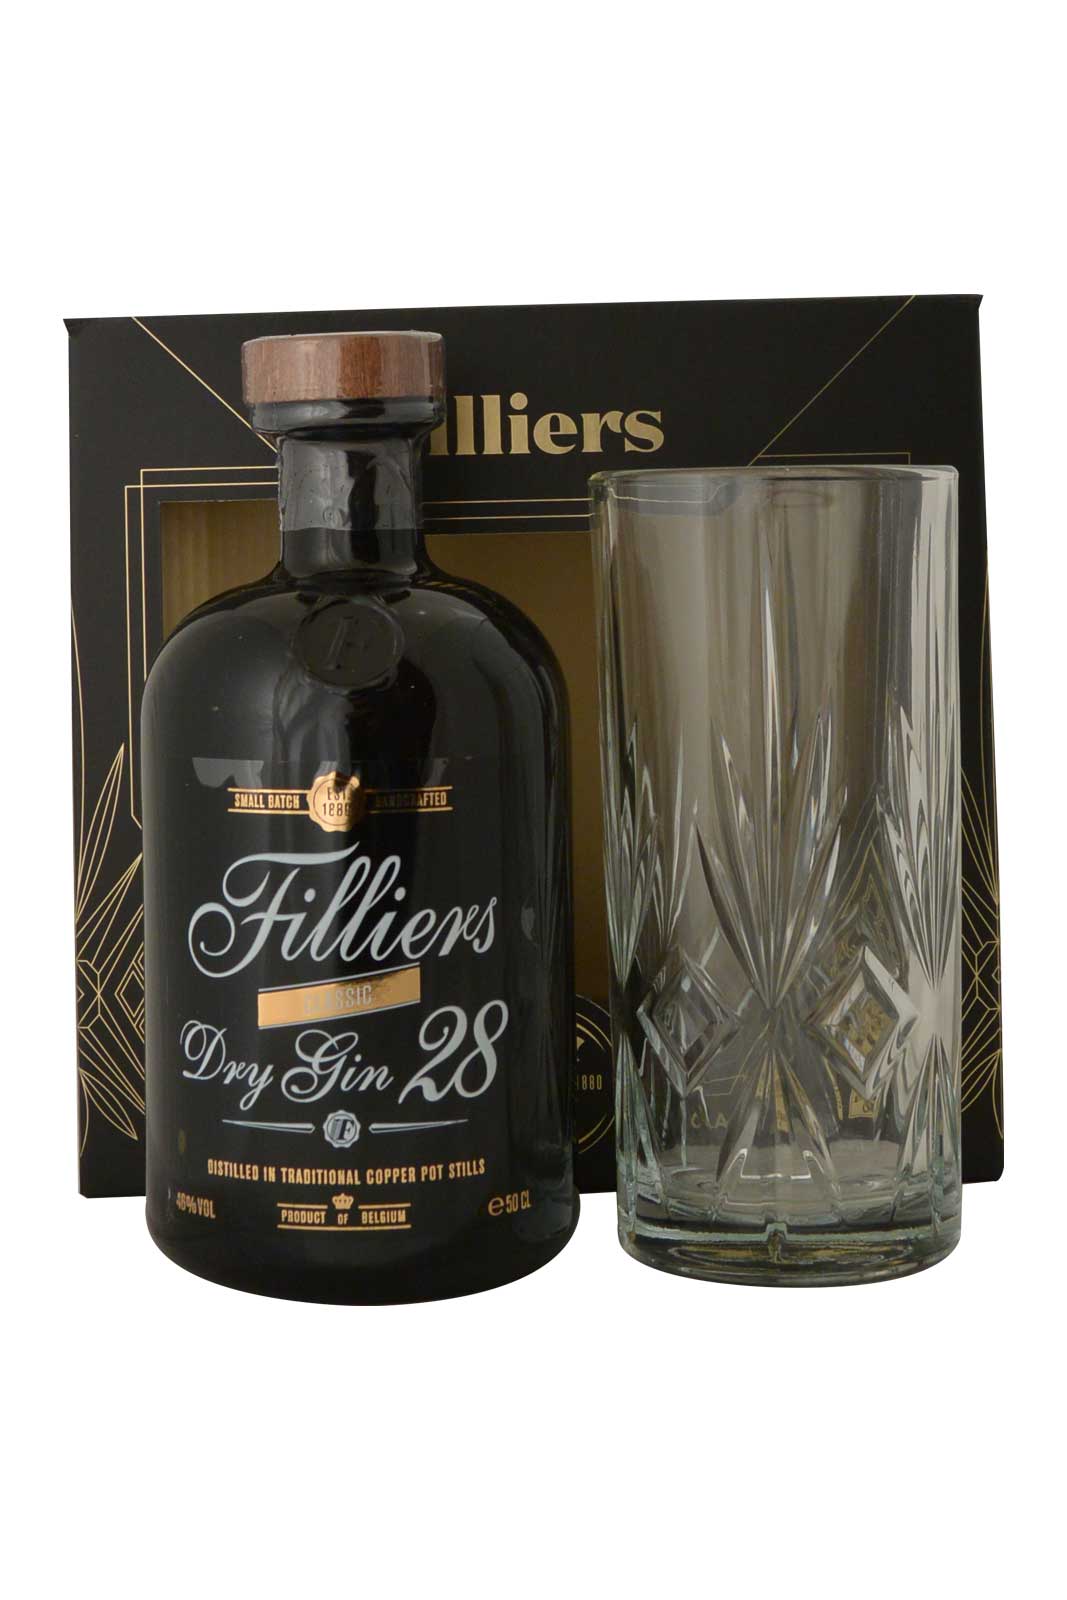 Filliers Dry Gin 28 Classic with Glass - Gift Box